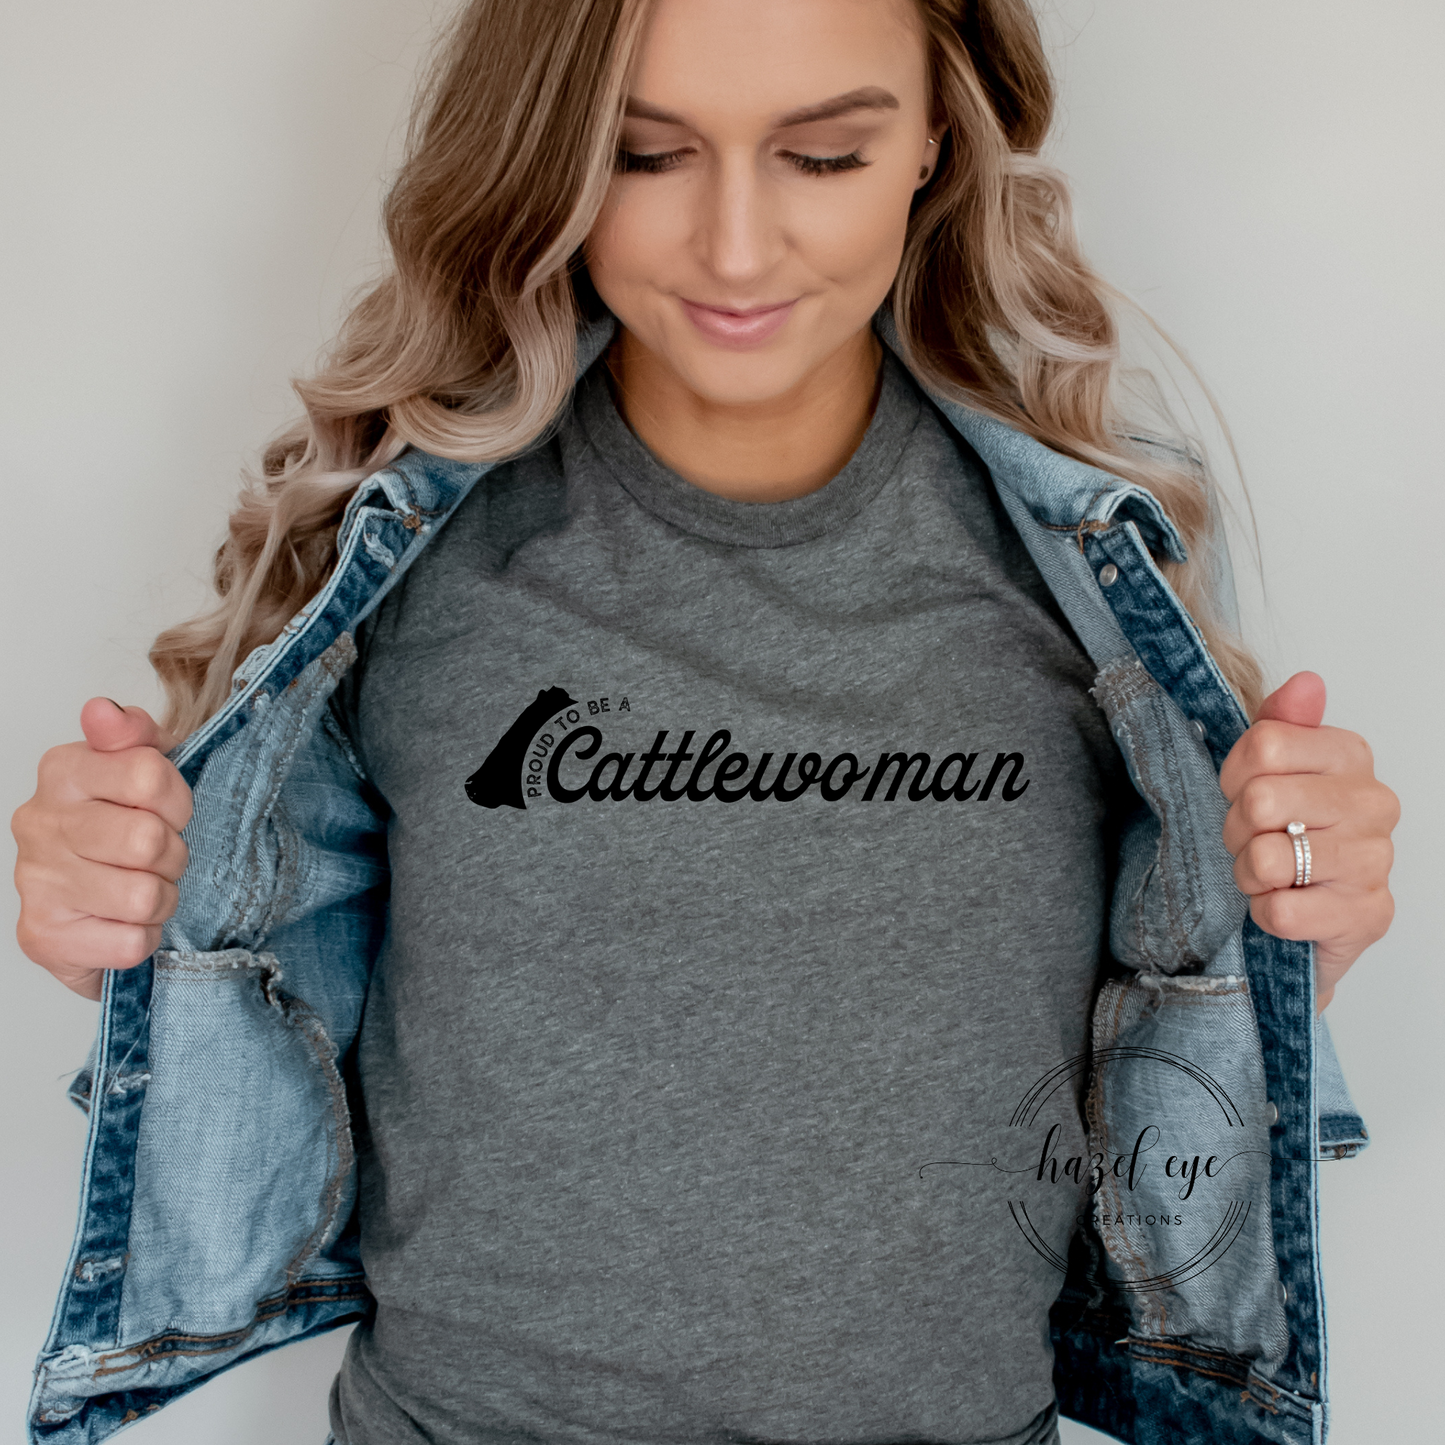 Proud to be a cattlewoman